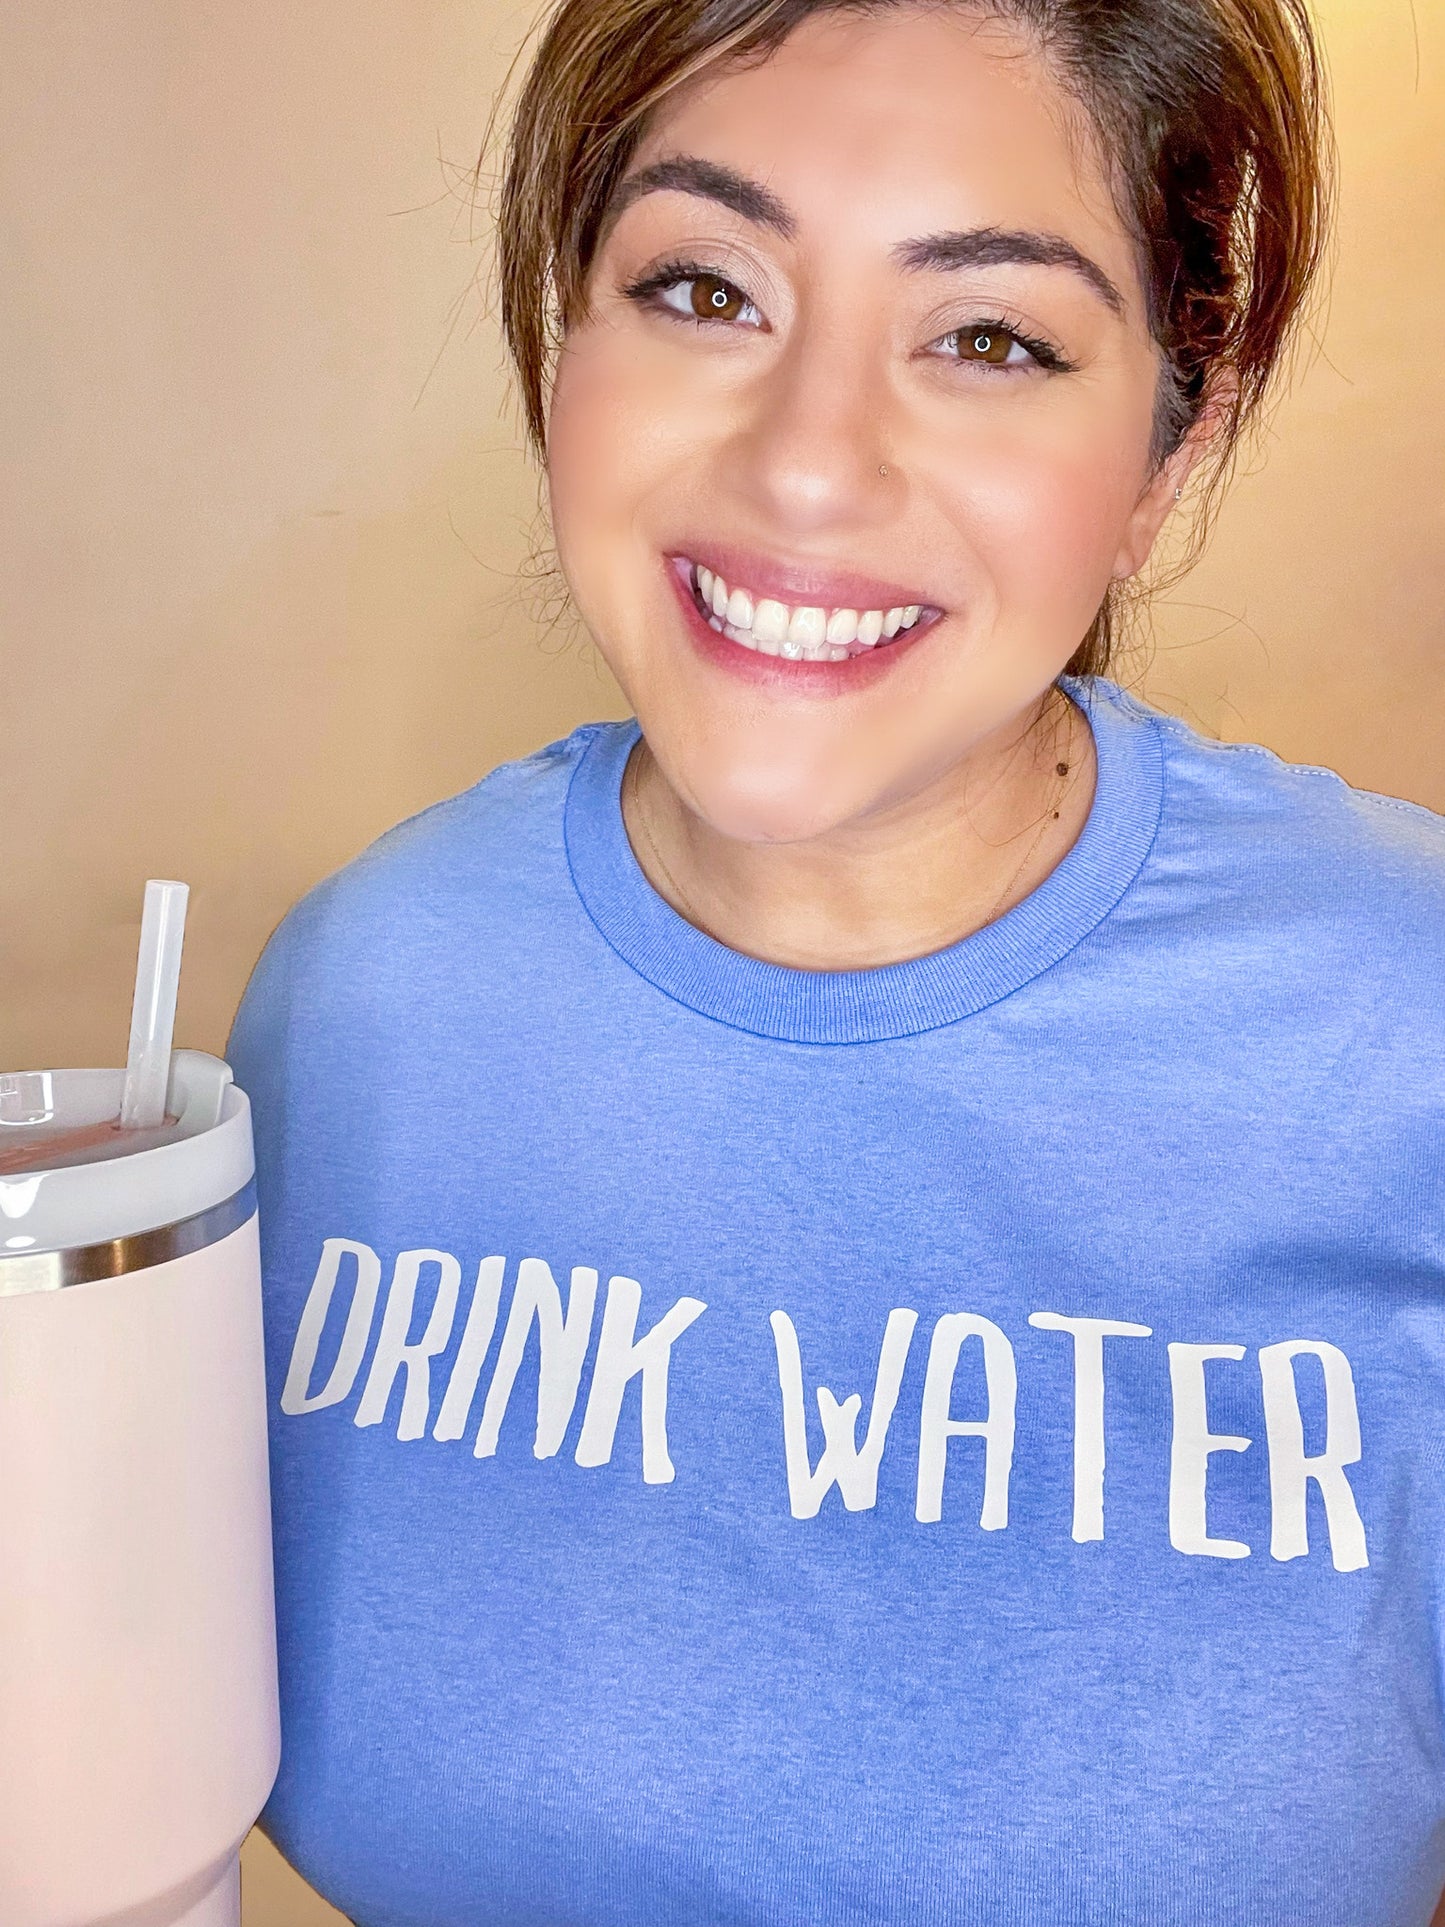 Drink Water T-Shirt